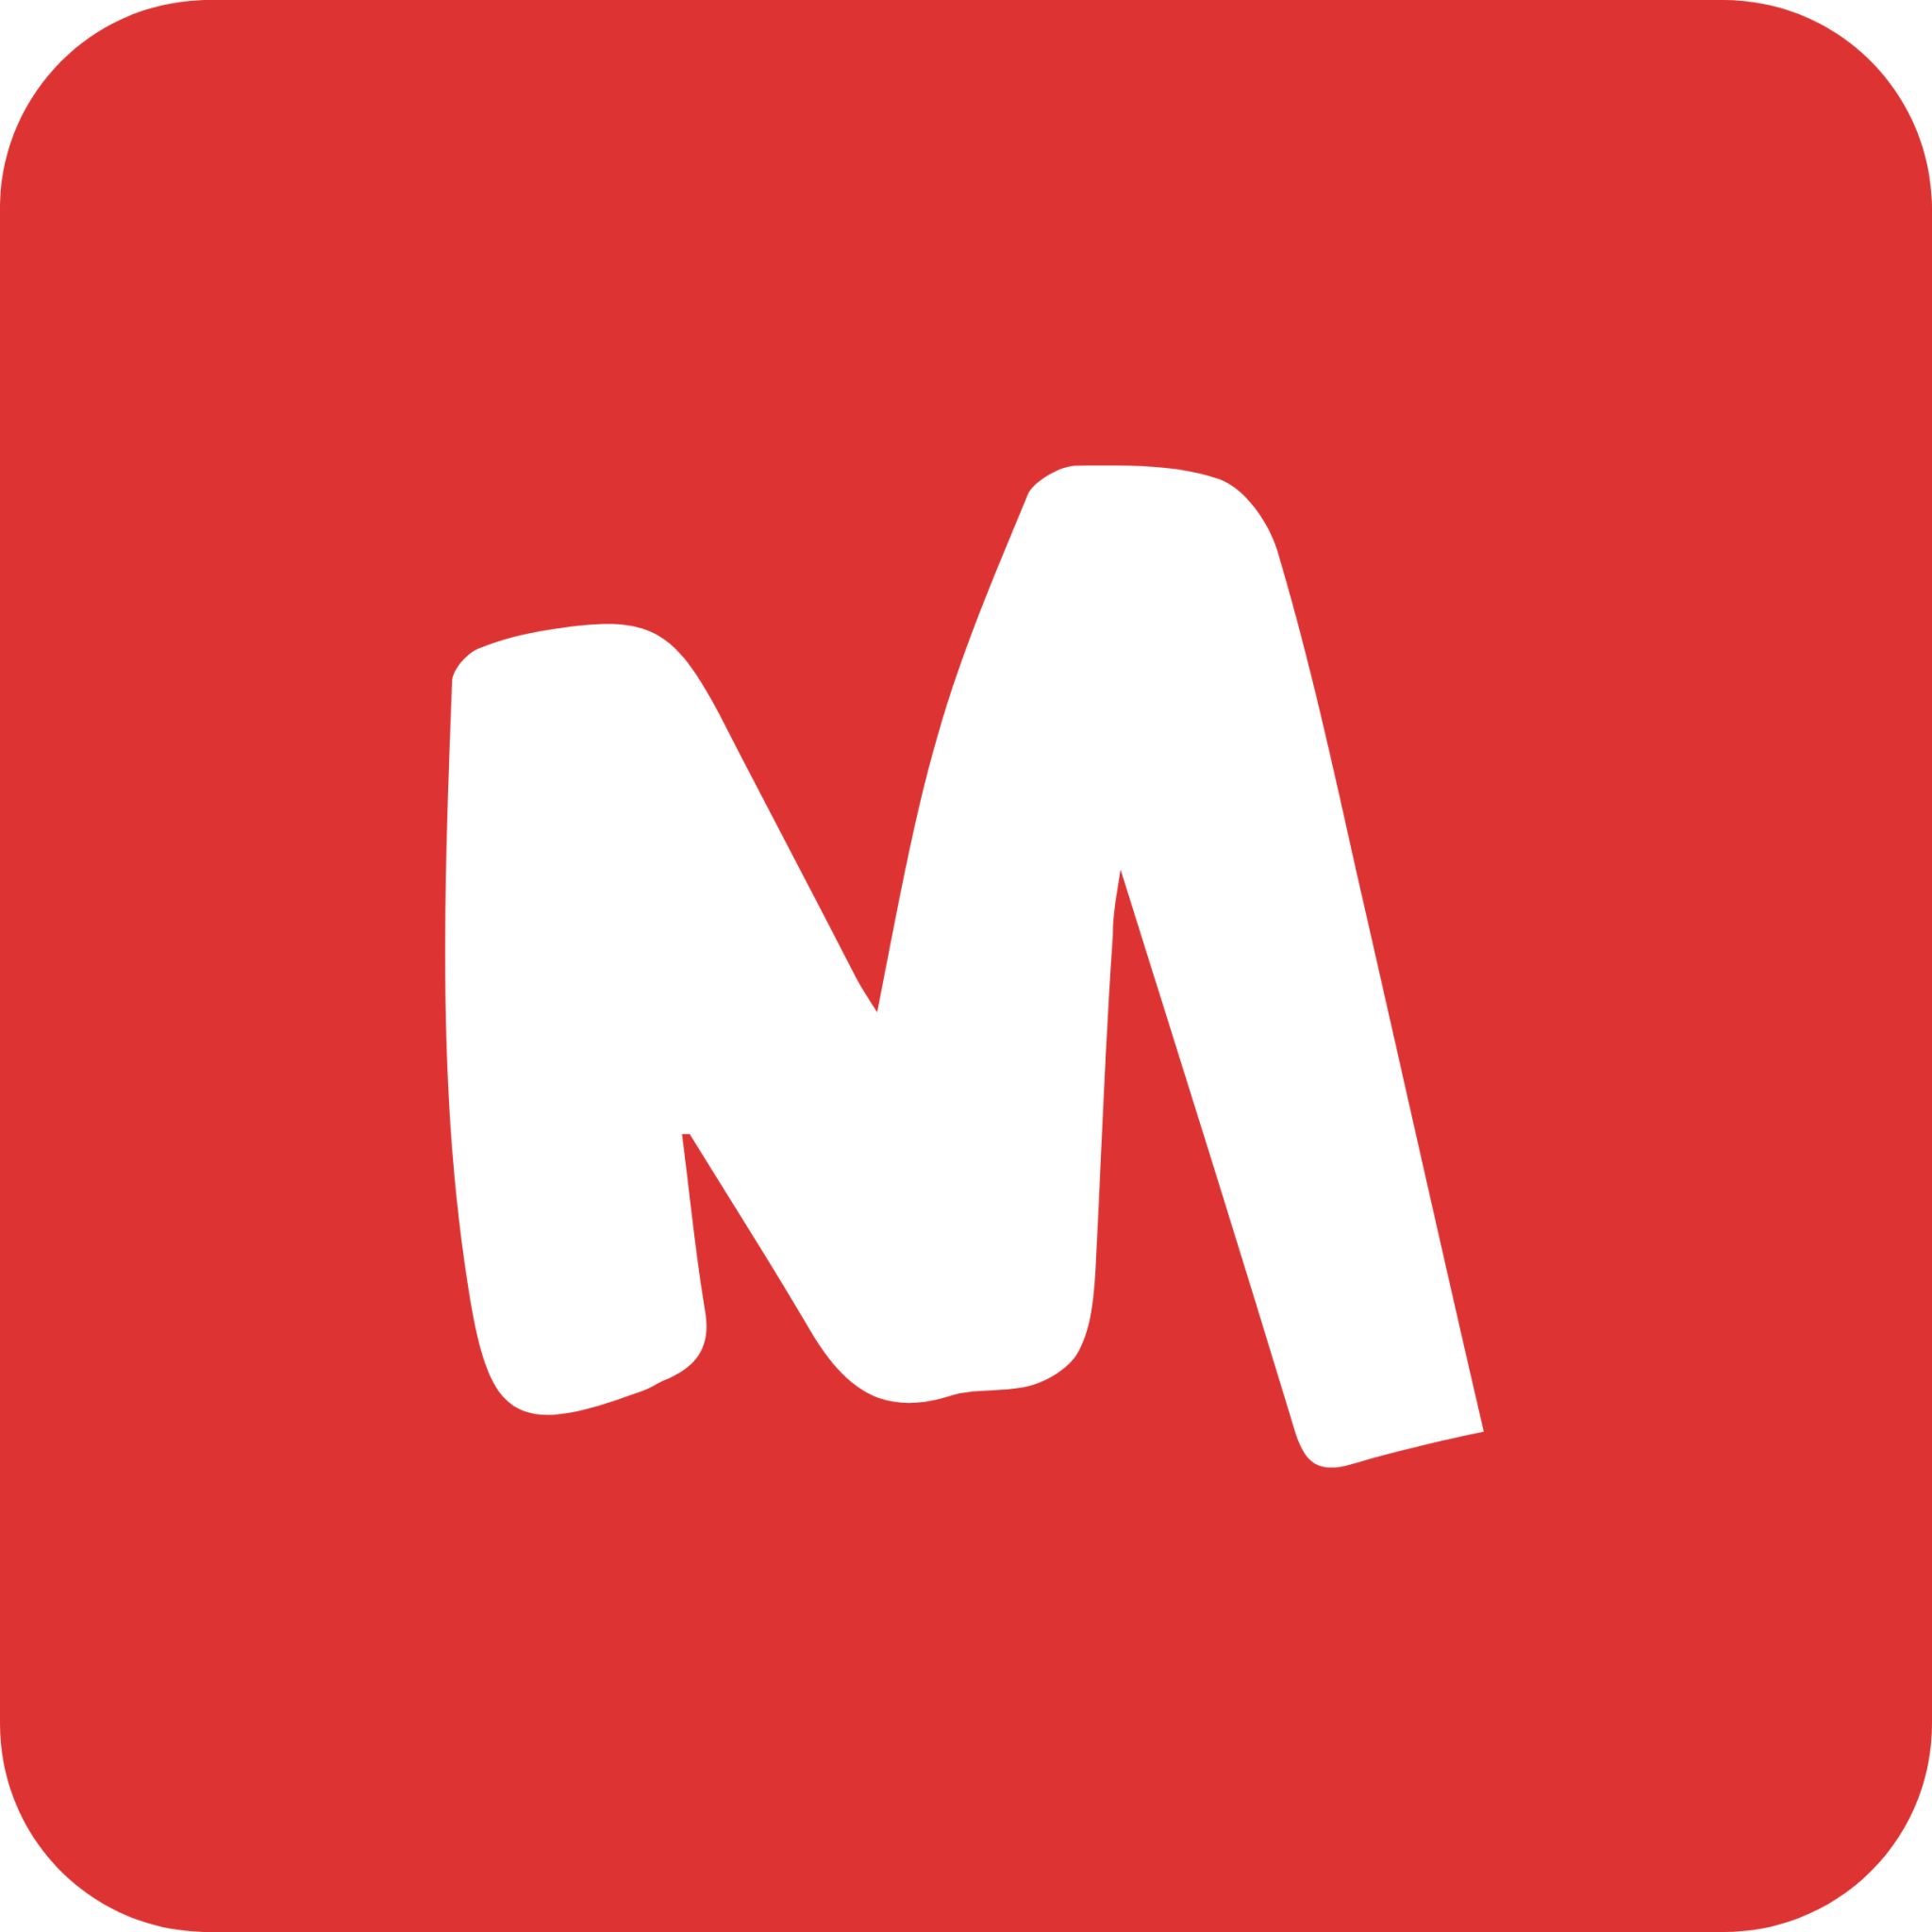 meetup rounded icon